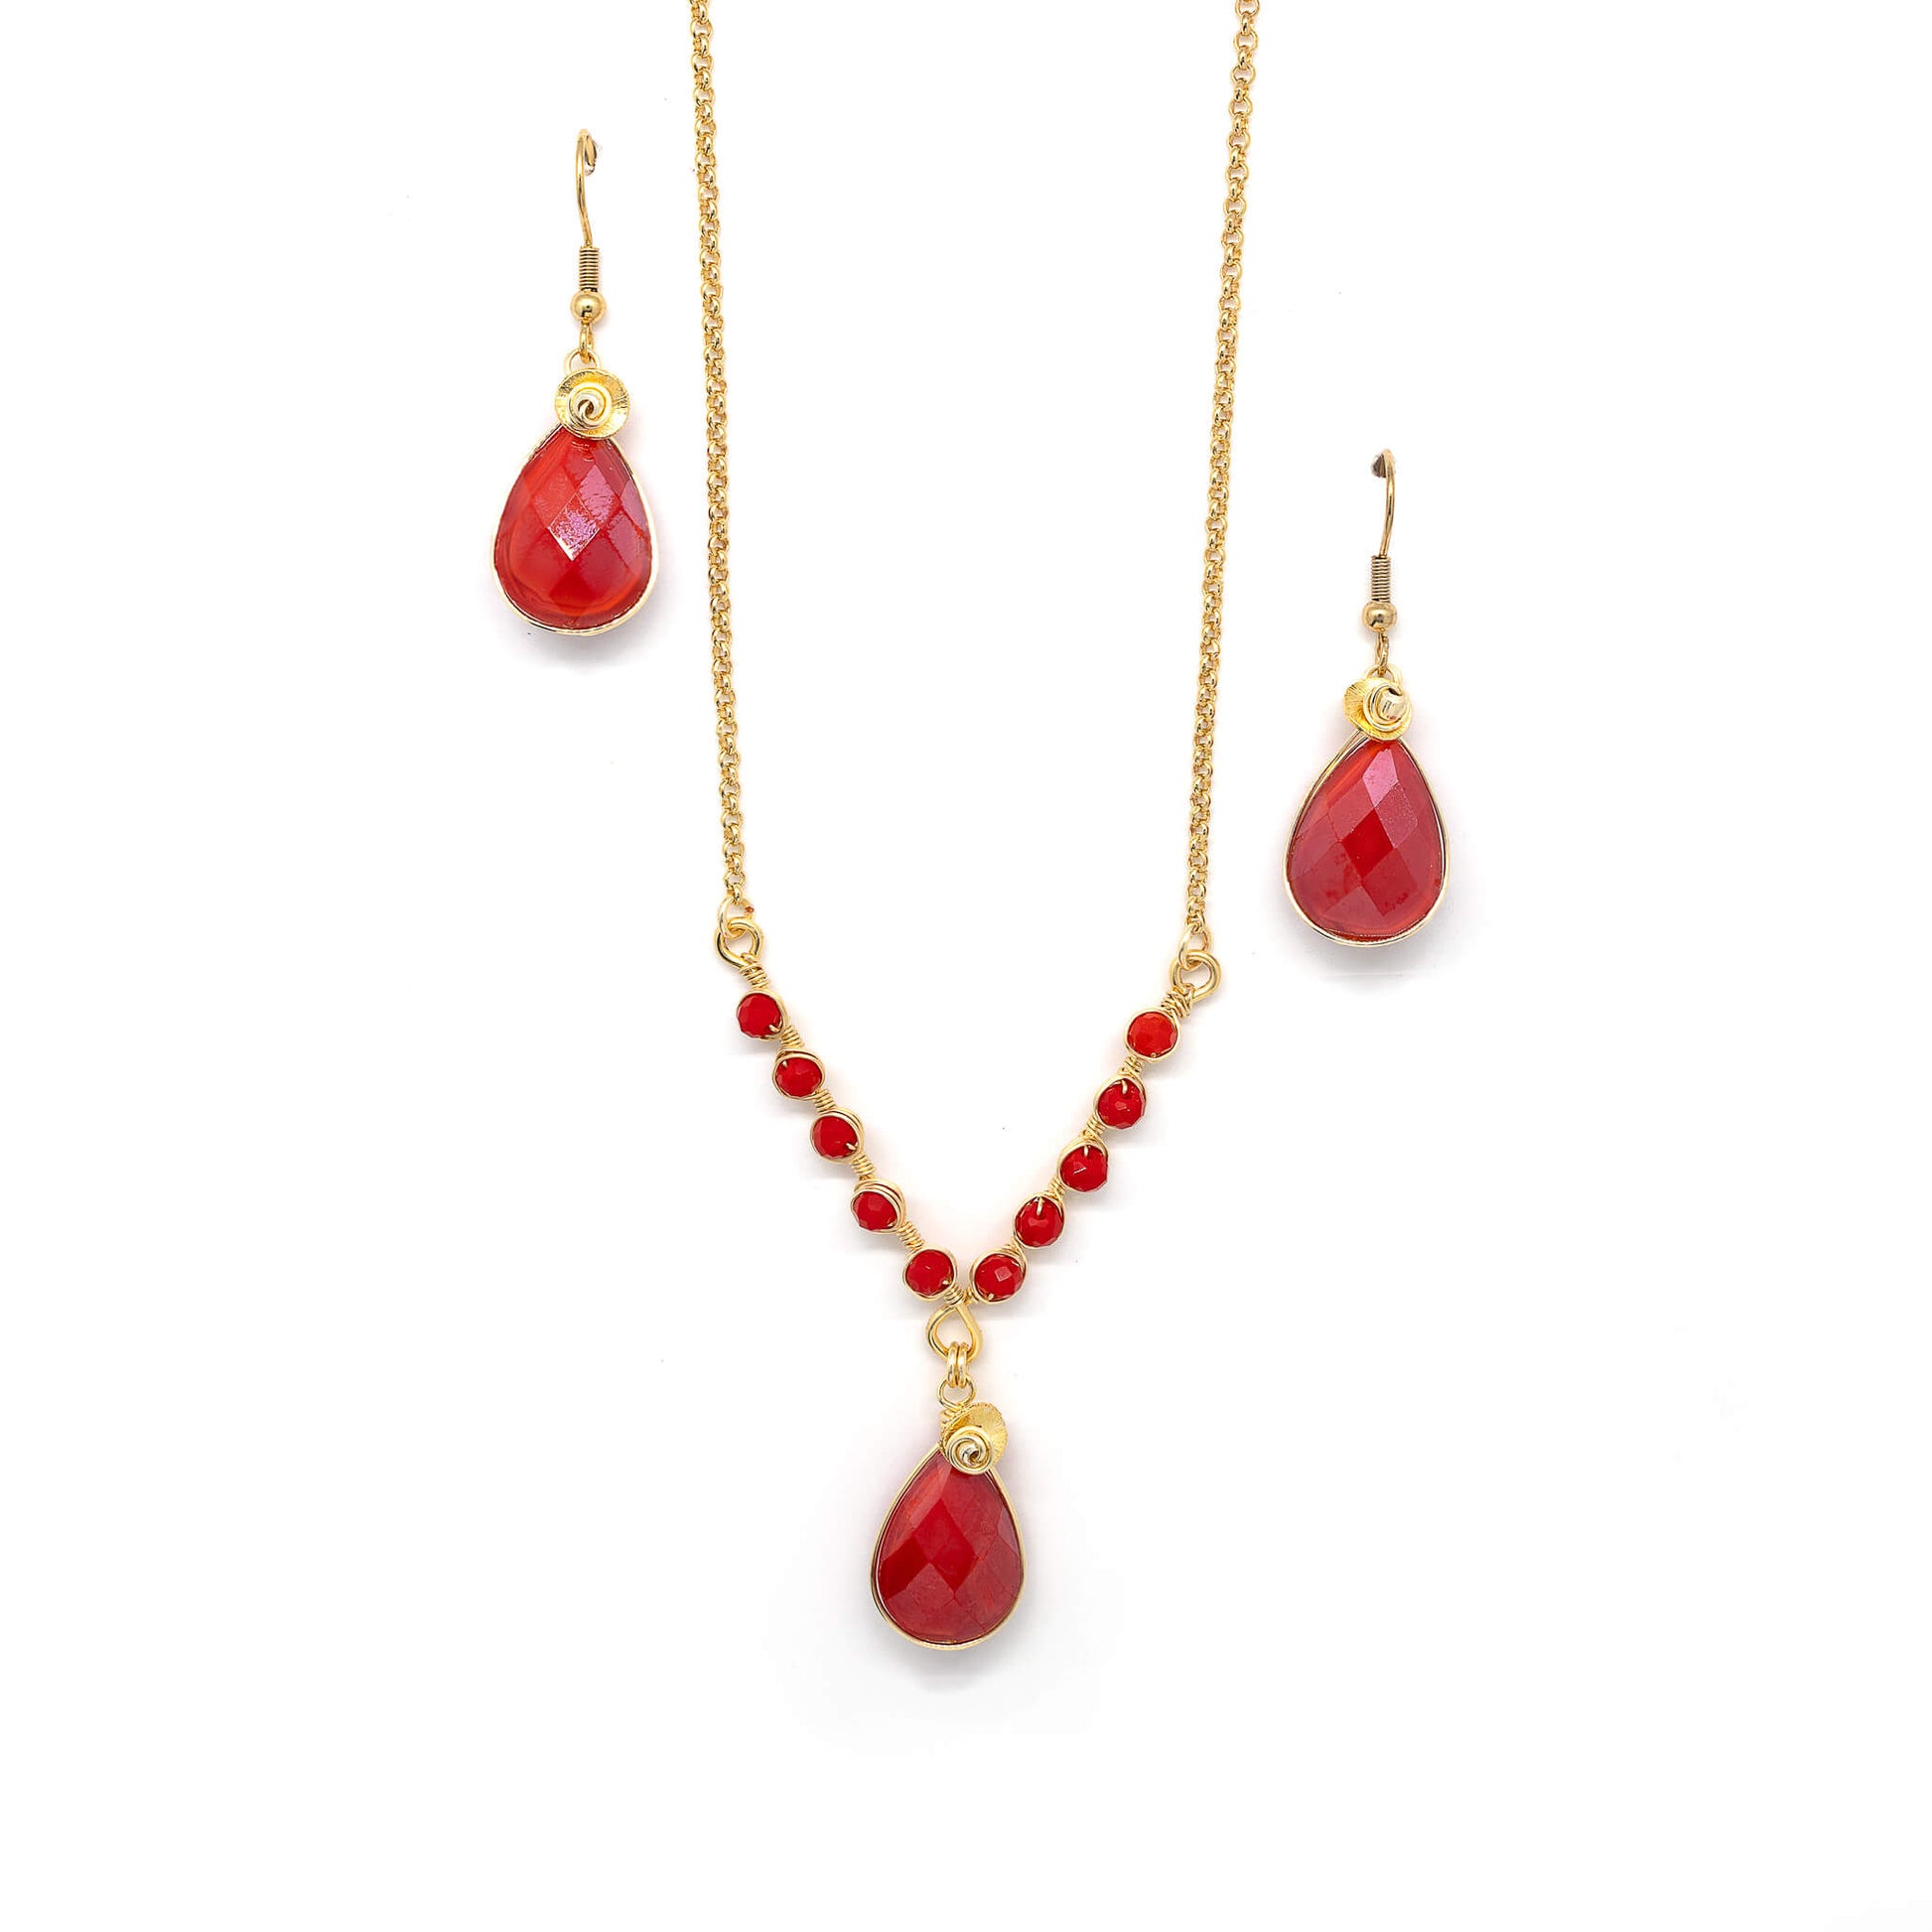 Victoria Necklace/Earrings Set. Red and Gold Set. Feature 16 inches with 2 inches extender 22K Gold Plated Chain, gold plated wire, and sparkling crystal beads. Handmade.